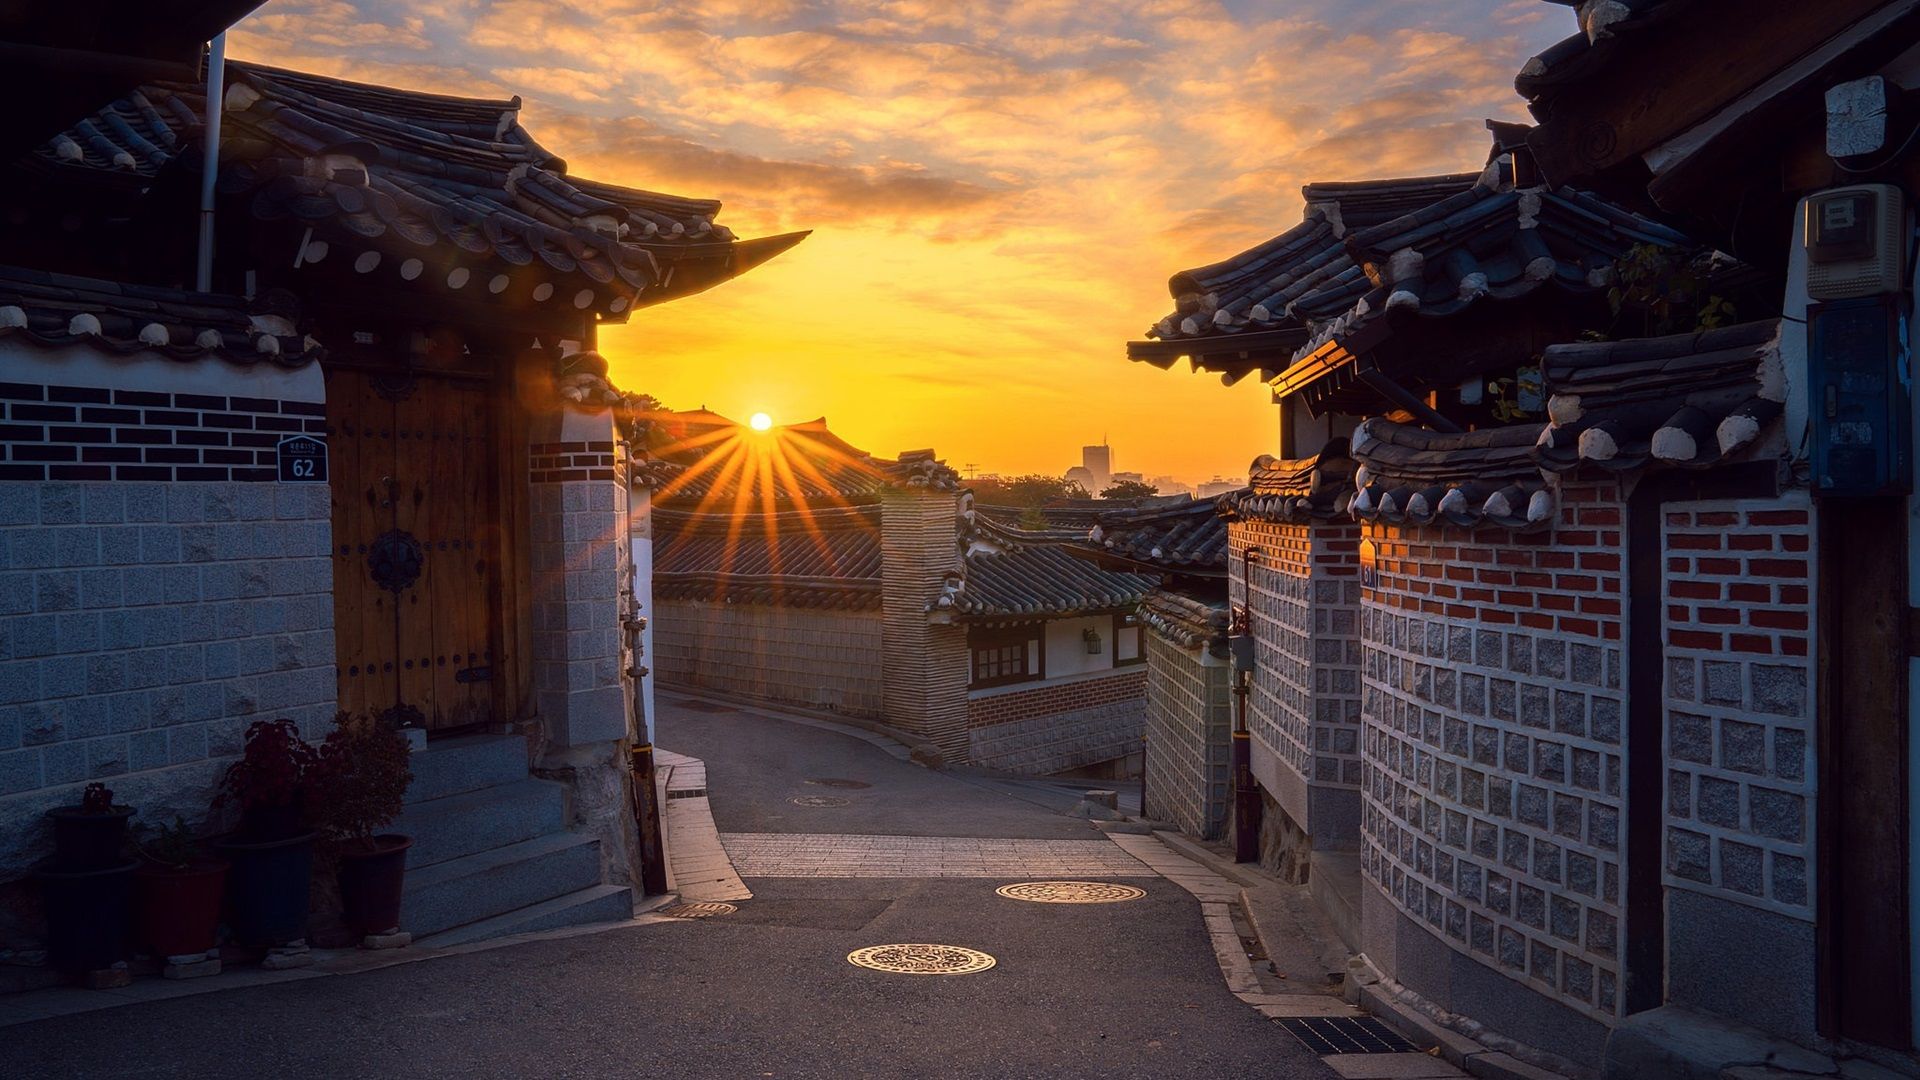 South Korea, Seoul, Old Town, Morning, Sunrise 640x1136 IPhone 5 5S 5C SE Wallpaper, Background, Picture, Image